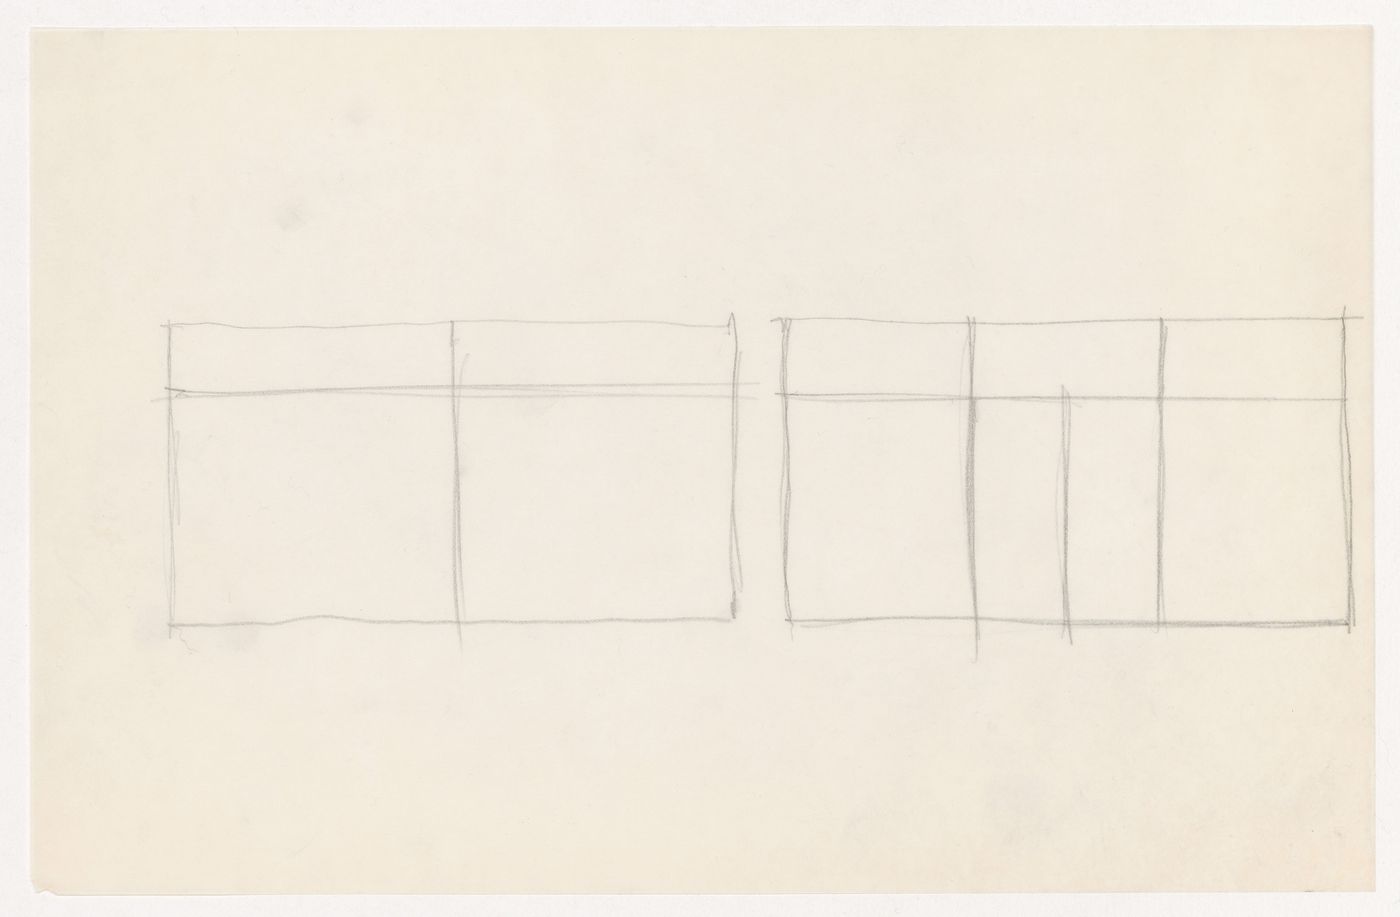 Sketch elevation for windows and sketch elevation for entrance for the Metallurgy Building, Illinois Institute of Technology, Chicago